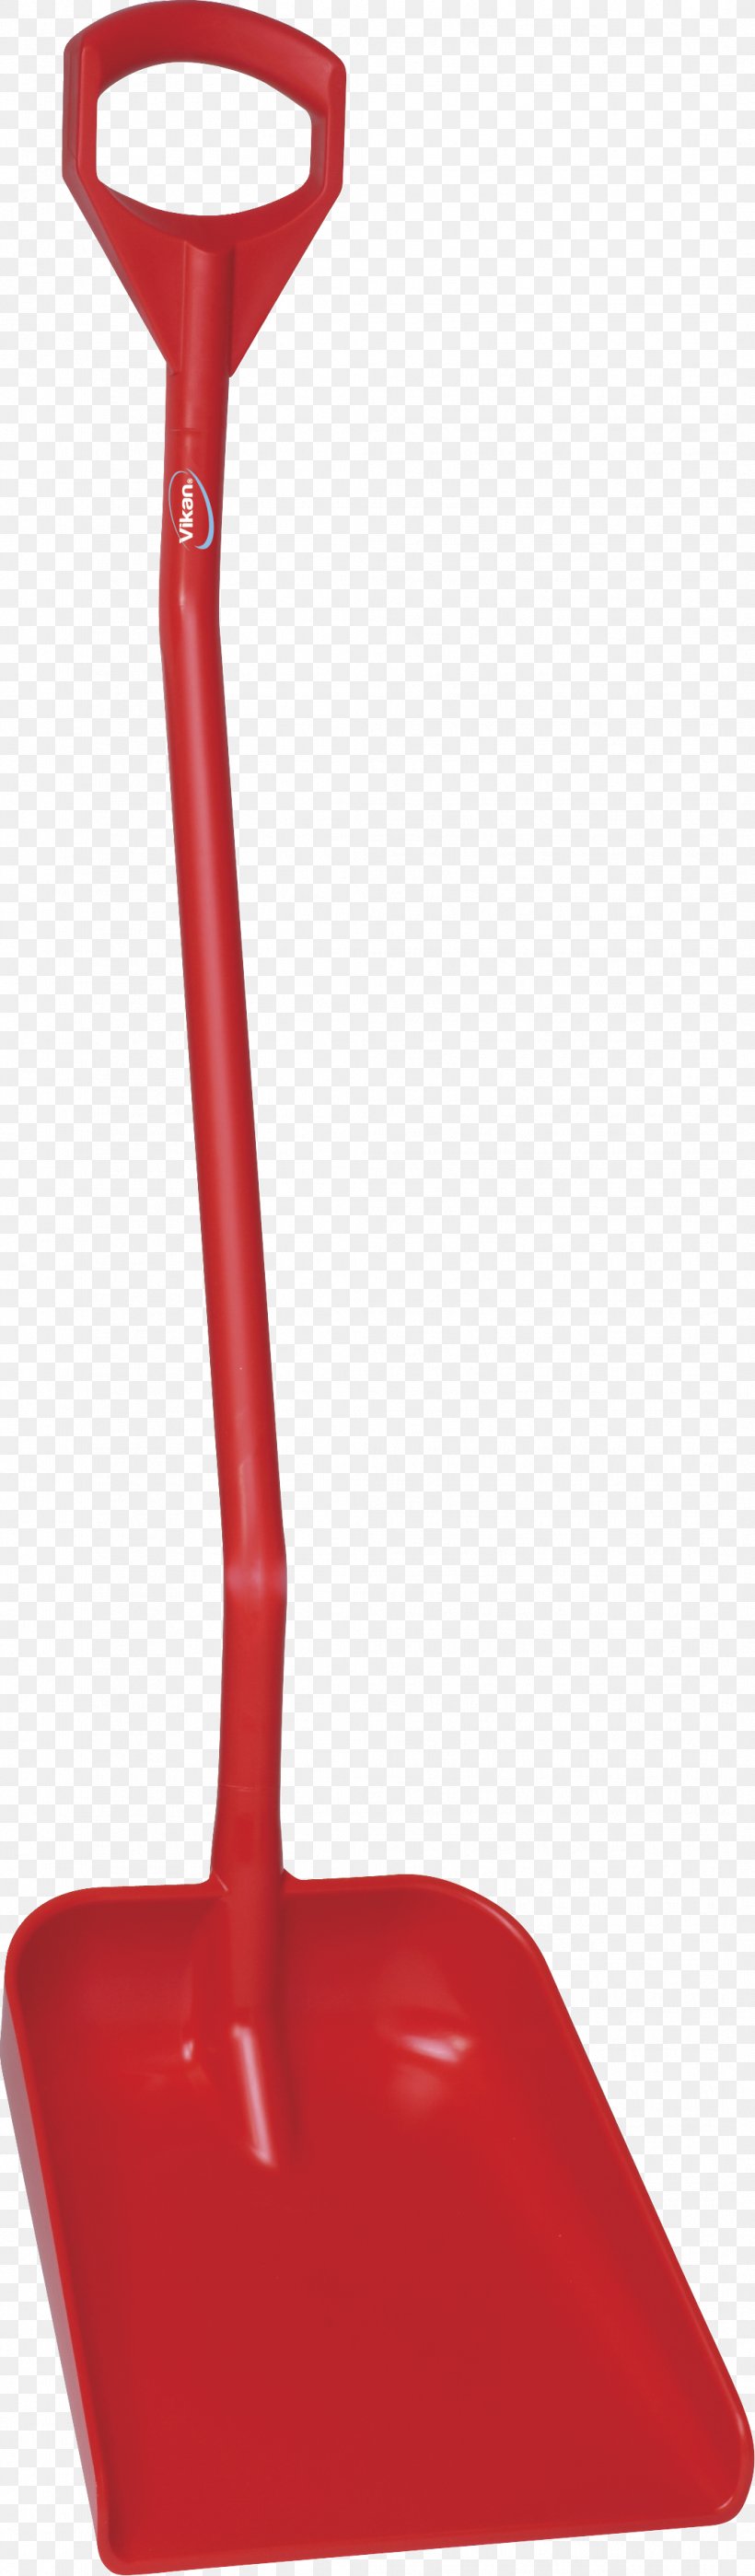 Shovel Industry Loader Cleaning Tool, PNG, 1068x3645px, Shovel, Cleaning, Dustpan, Food Industry, Hardware Download Free